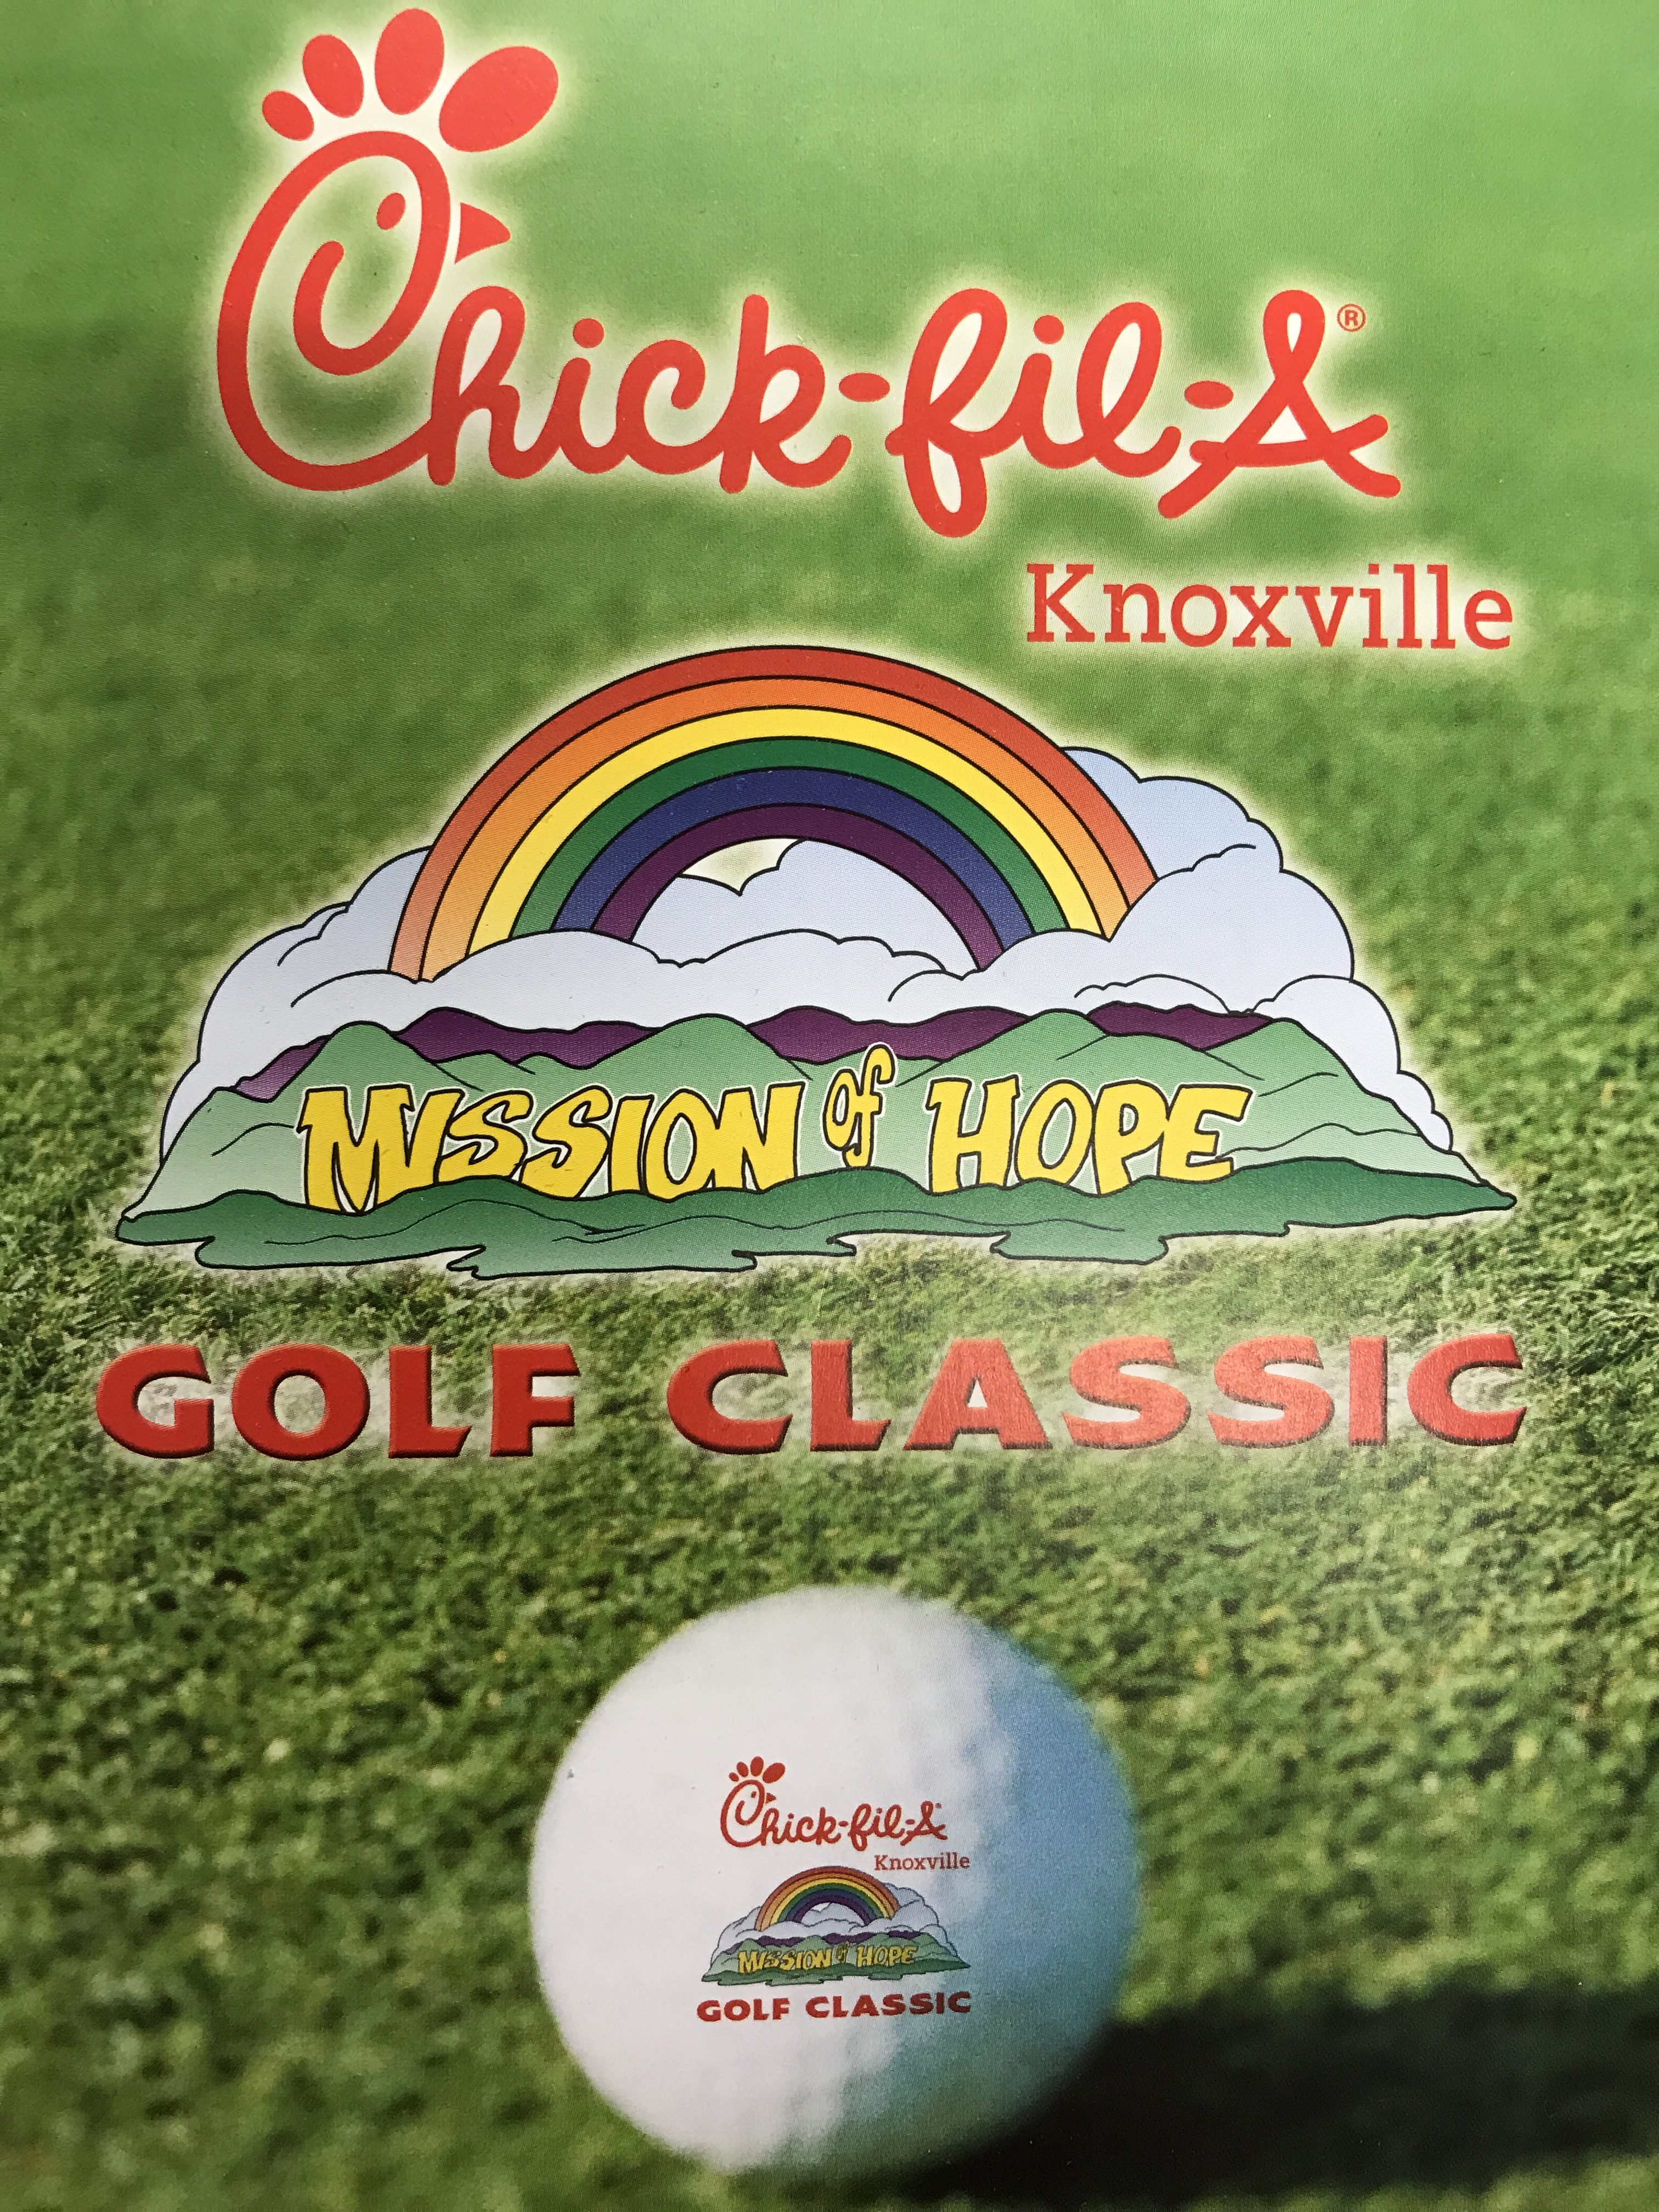 2018 15th Annual Chick-fil-A and Mission of Hope Golf Classic